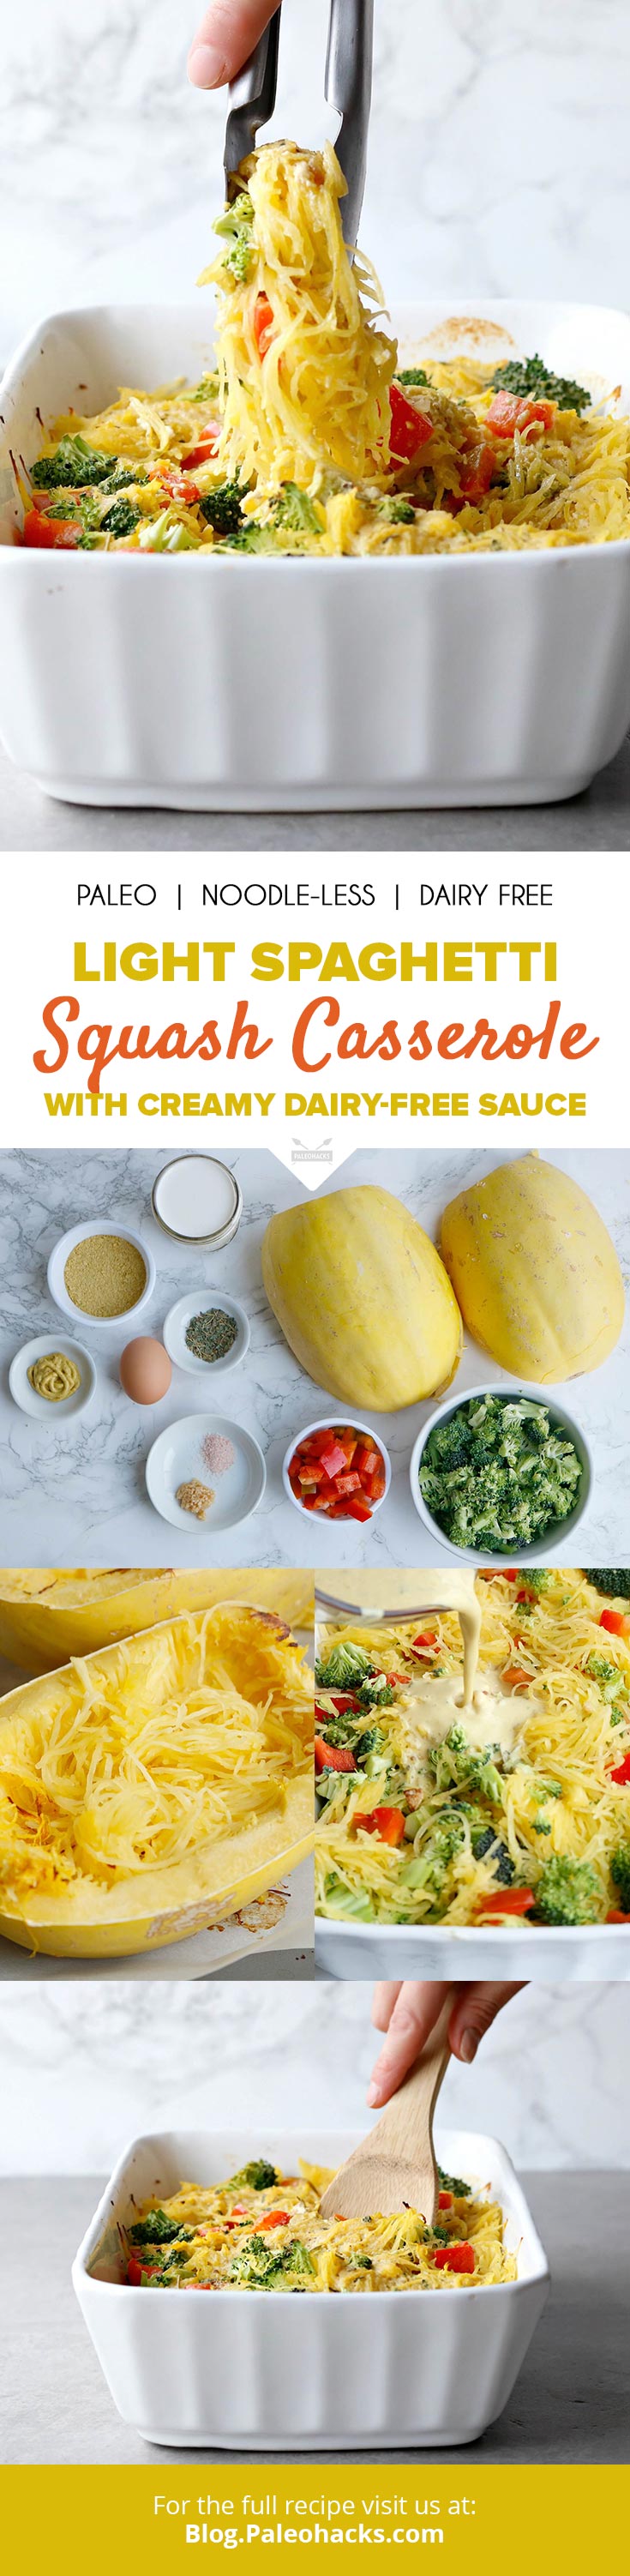 Smothered in a dairy-free cream sauce, this vegetarian spaghetti squash casserole makes for a crowd-pleasing meatless dinner.